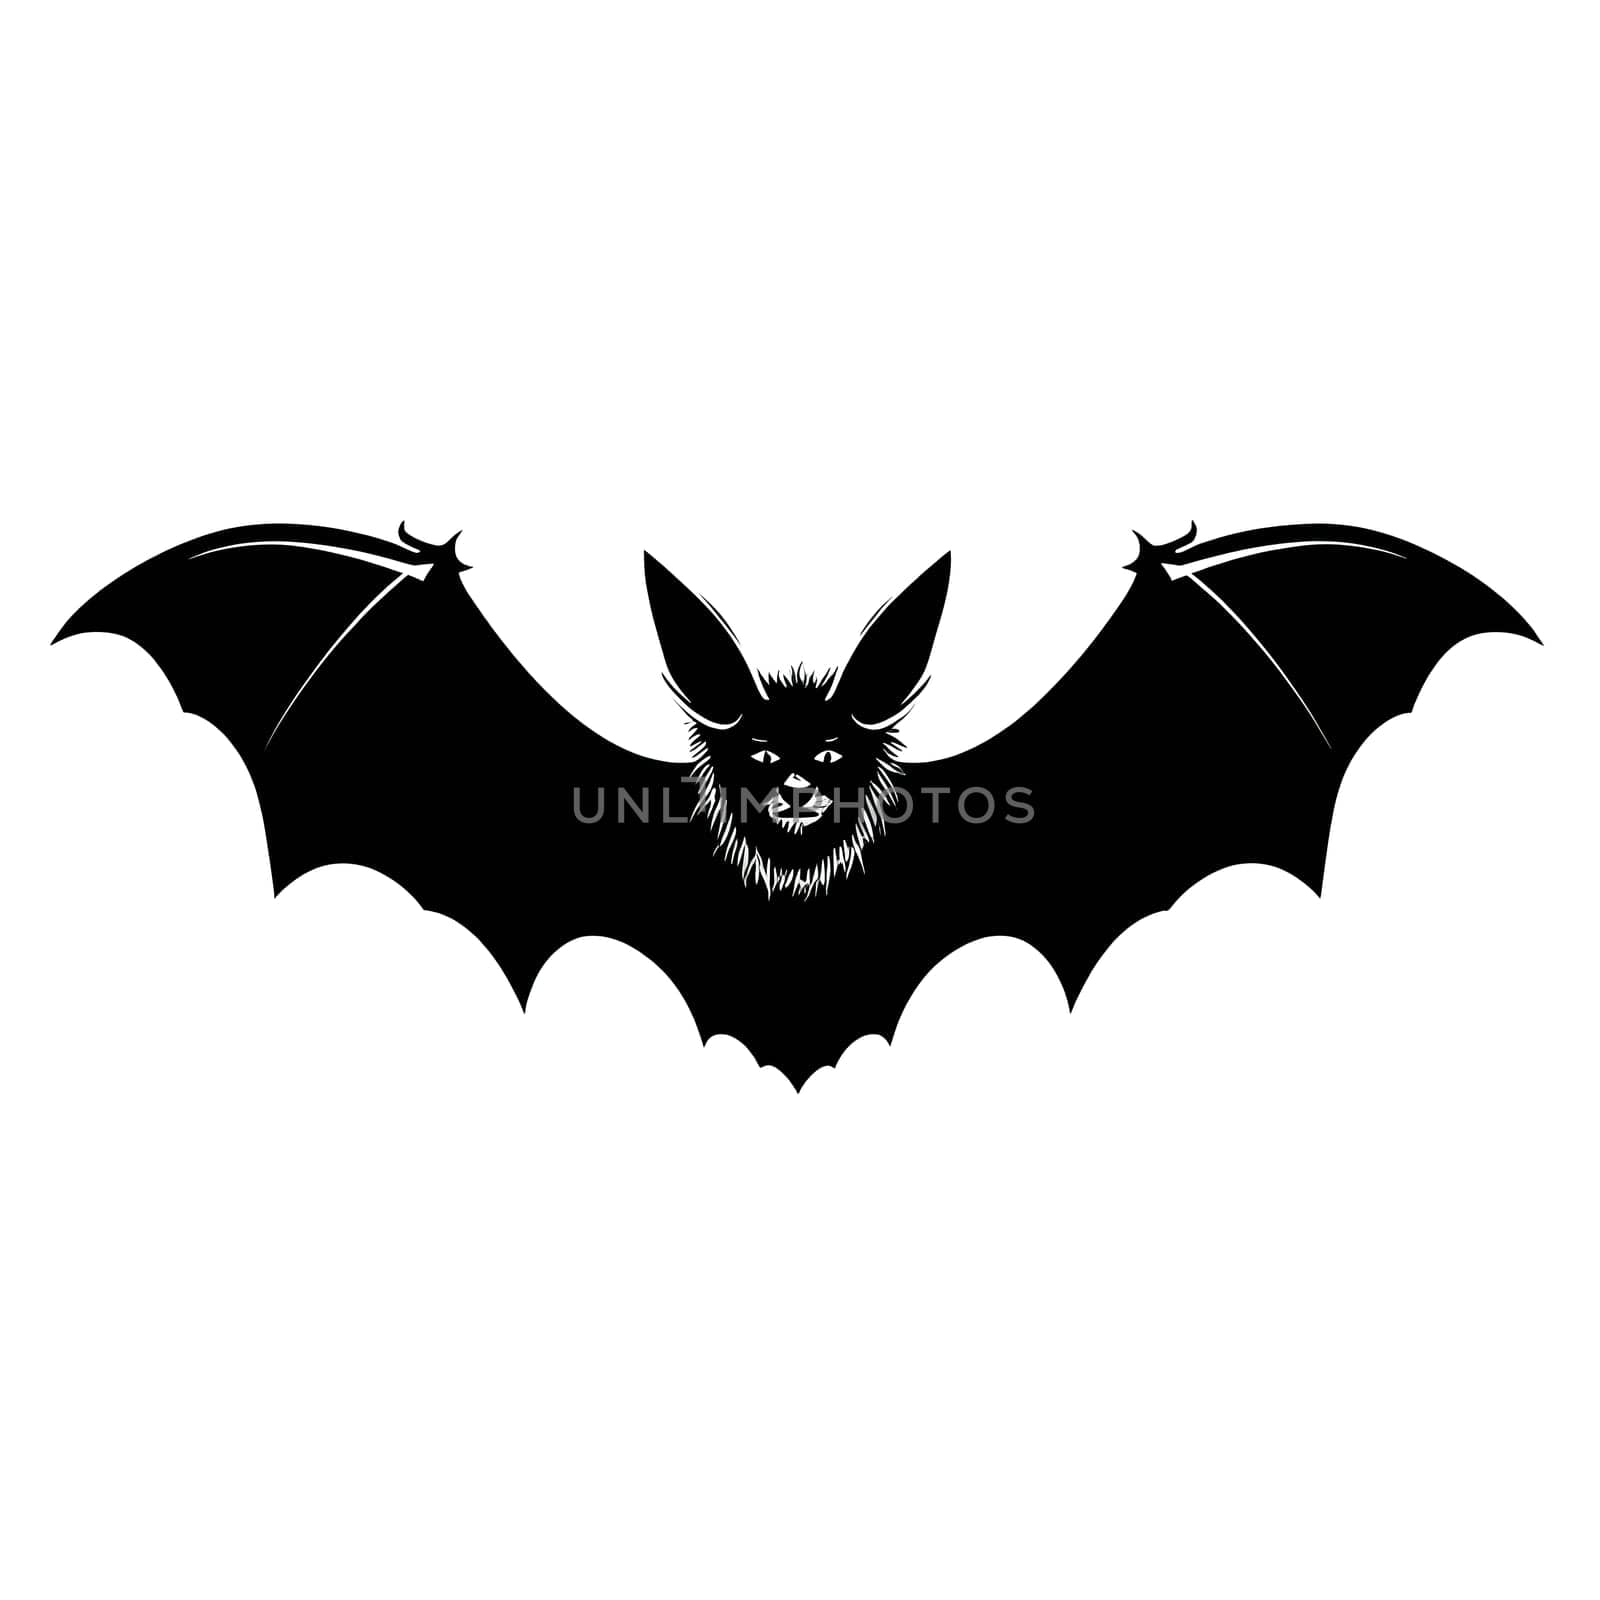 Vector illustration of a bat in black silhouette against a clean white background, capturing graceful forms.